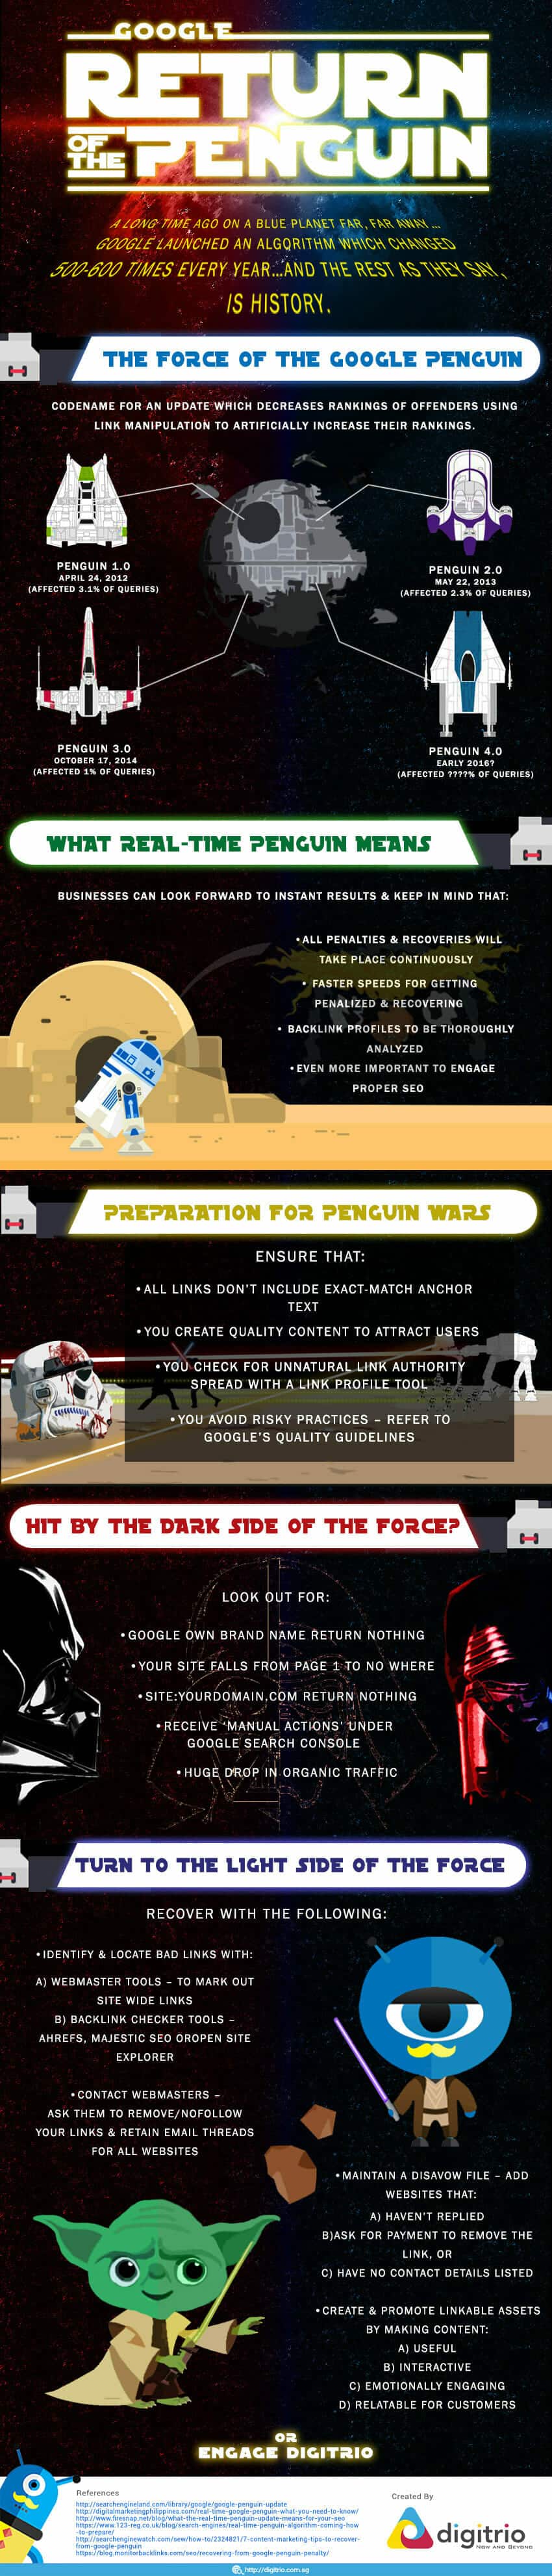 The Return of the Penguin (Real-time) - An Infographic from Digitrio